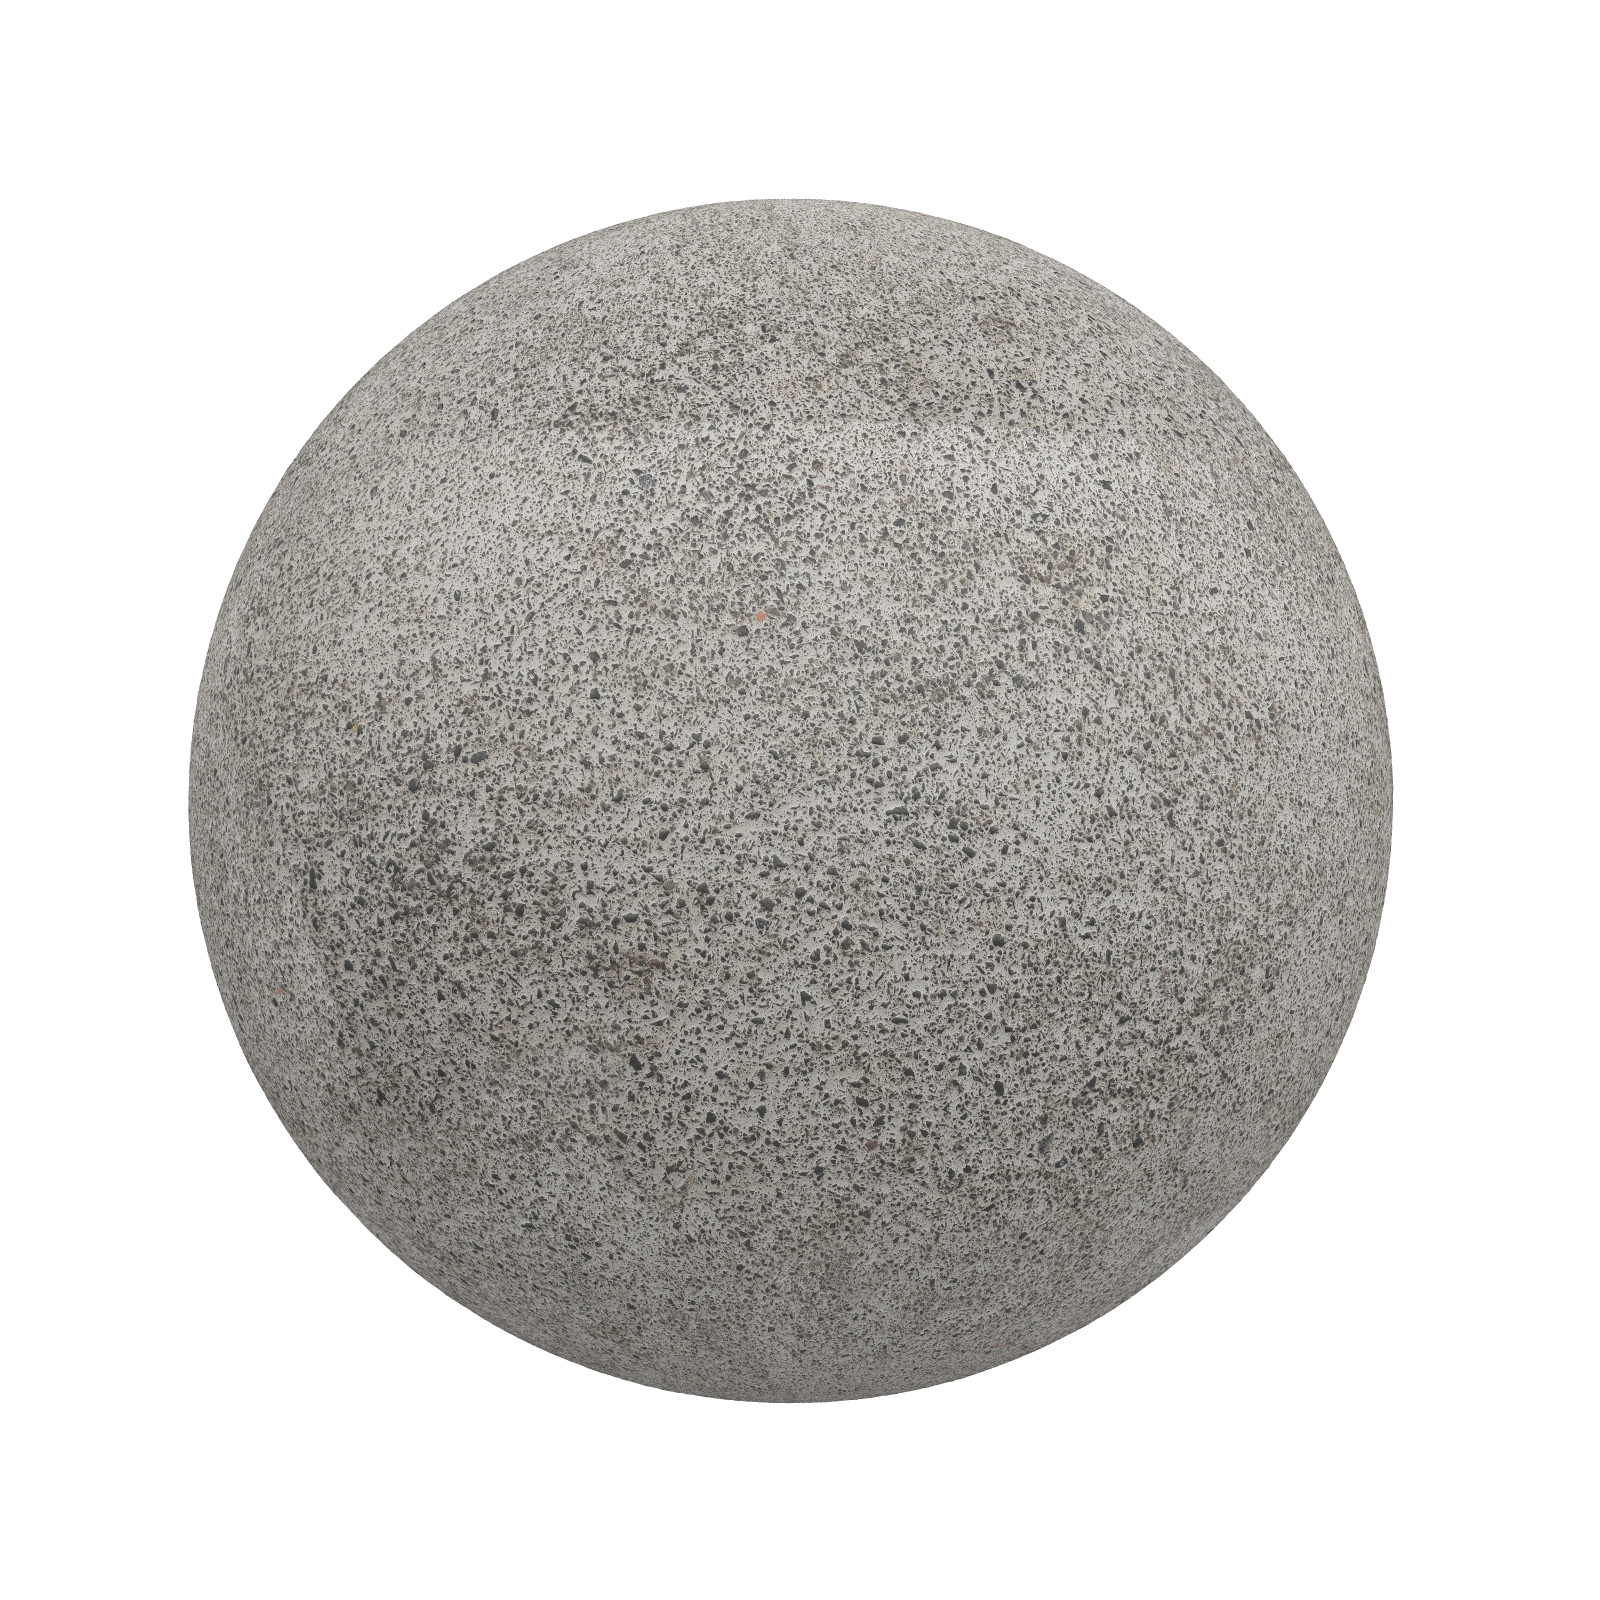 TEXTURES – STONES – CGAxis PBR Colection Vol 1 Stones – grey stone 3 - thumbnail 1